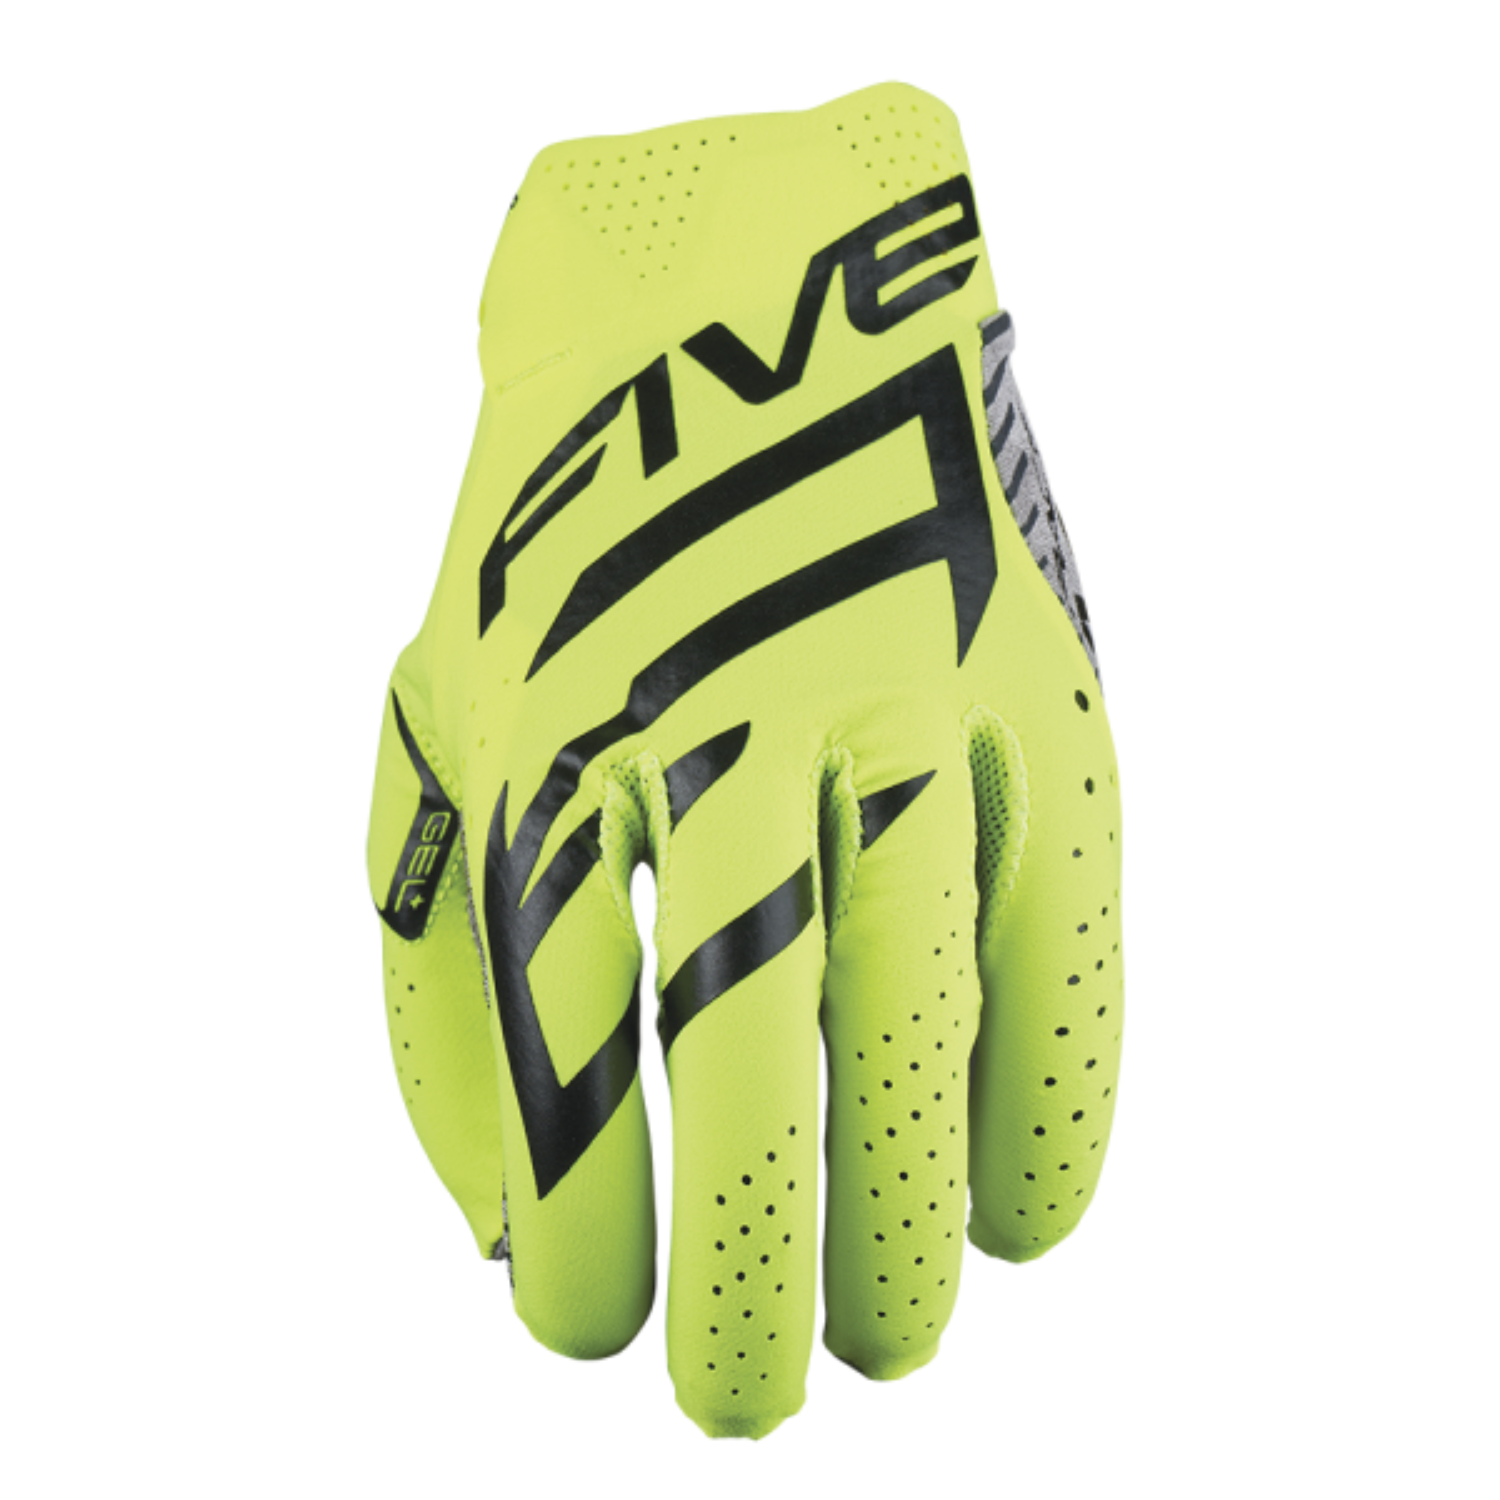 Image of Five MXF Race Gloves Fluorescent Yellow Size 2XL ID 3841300111884